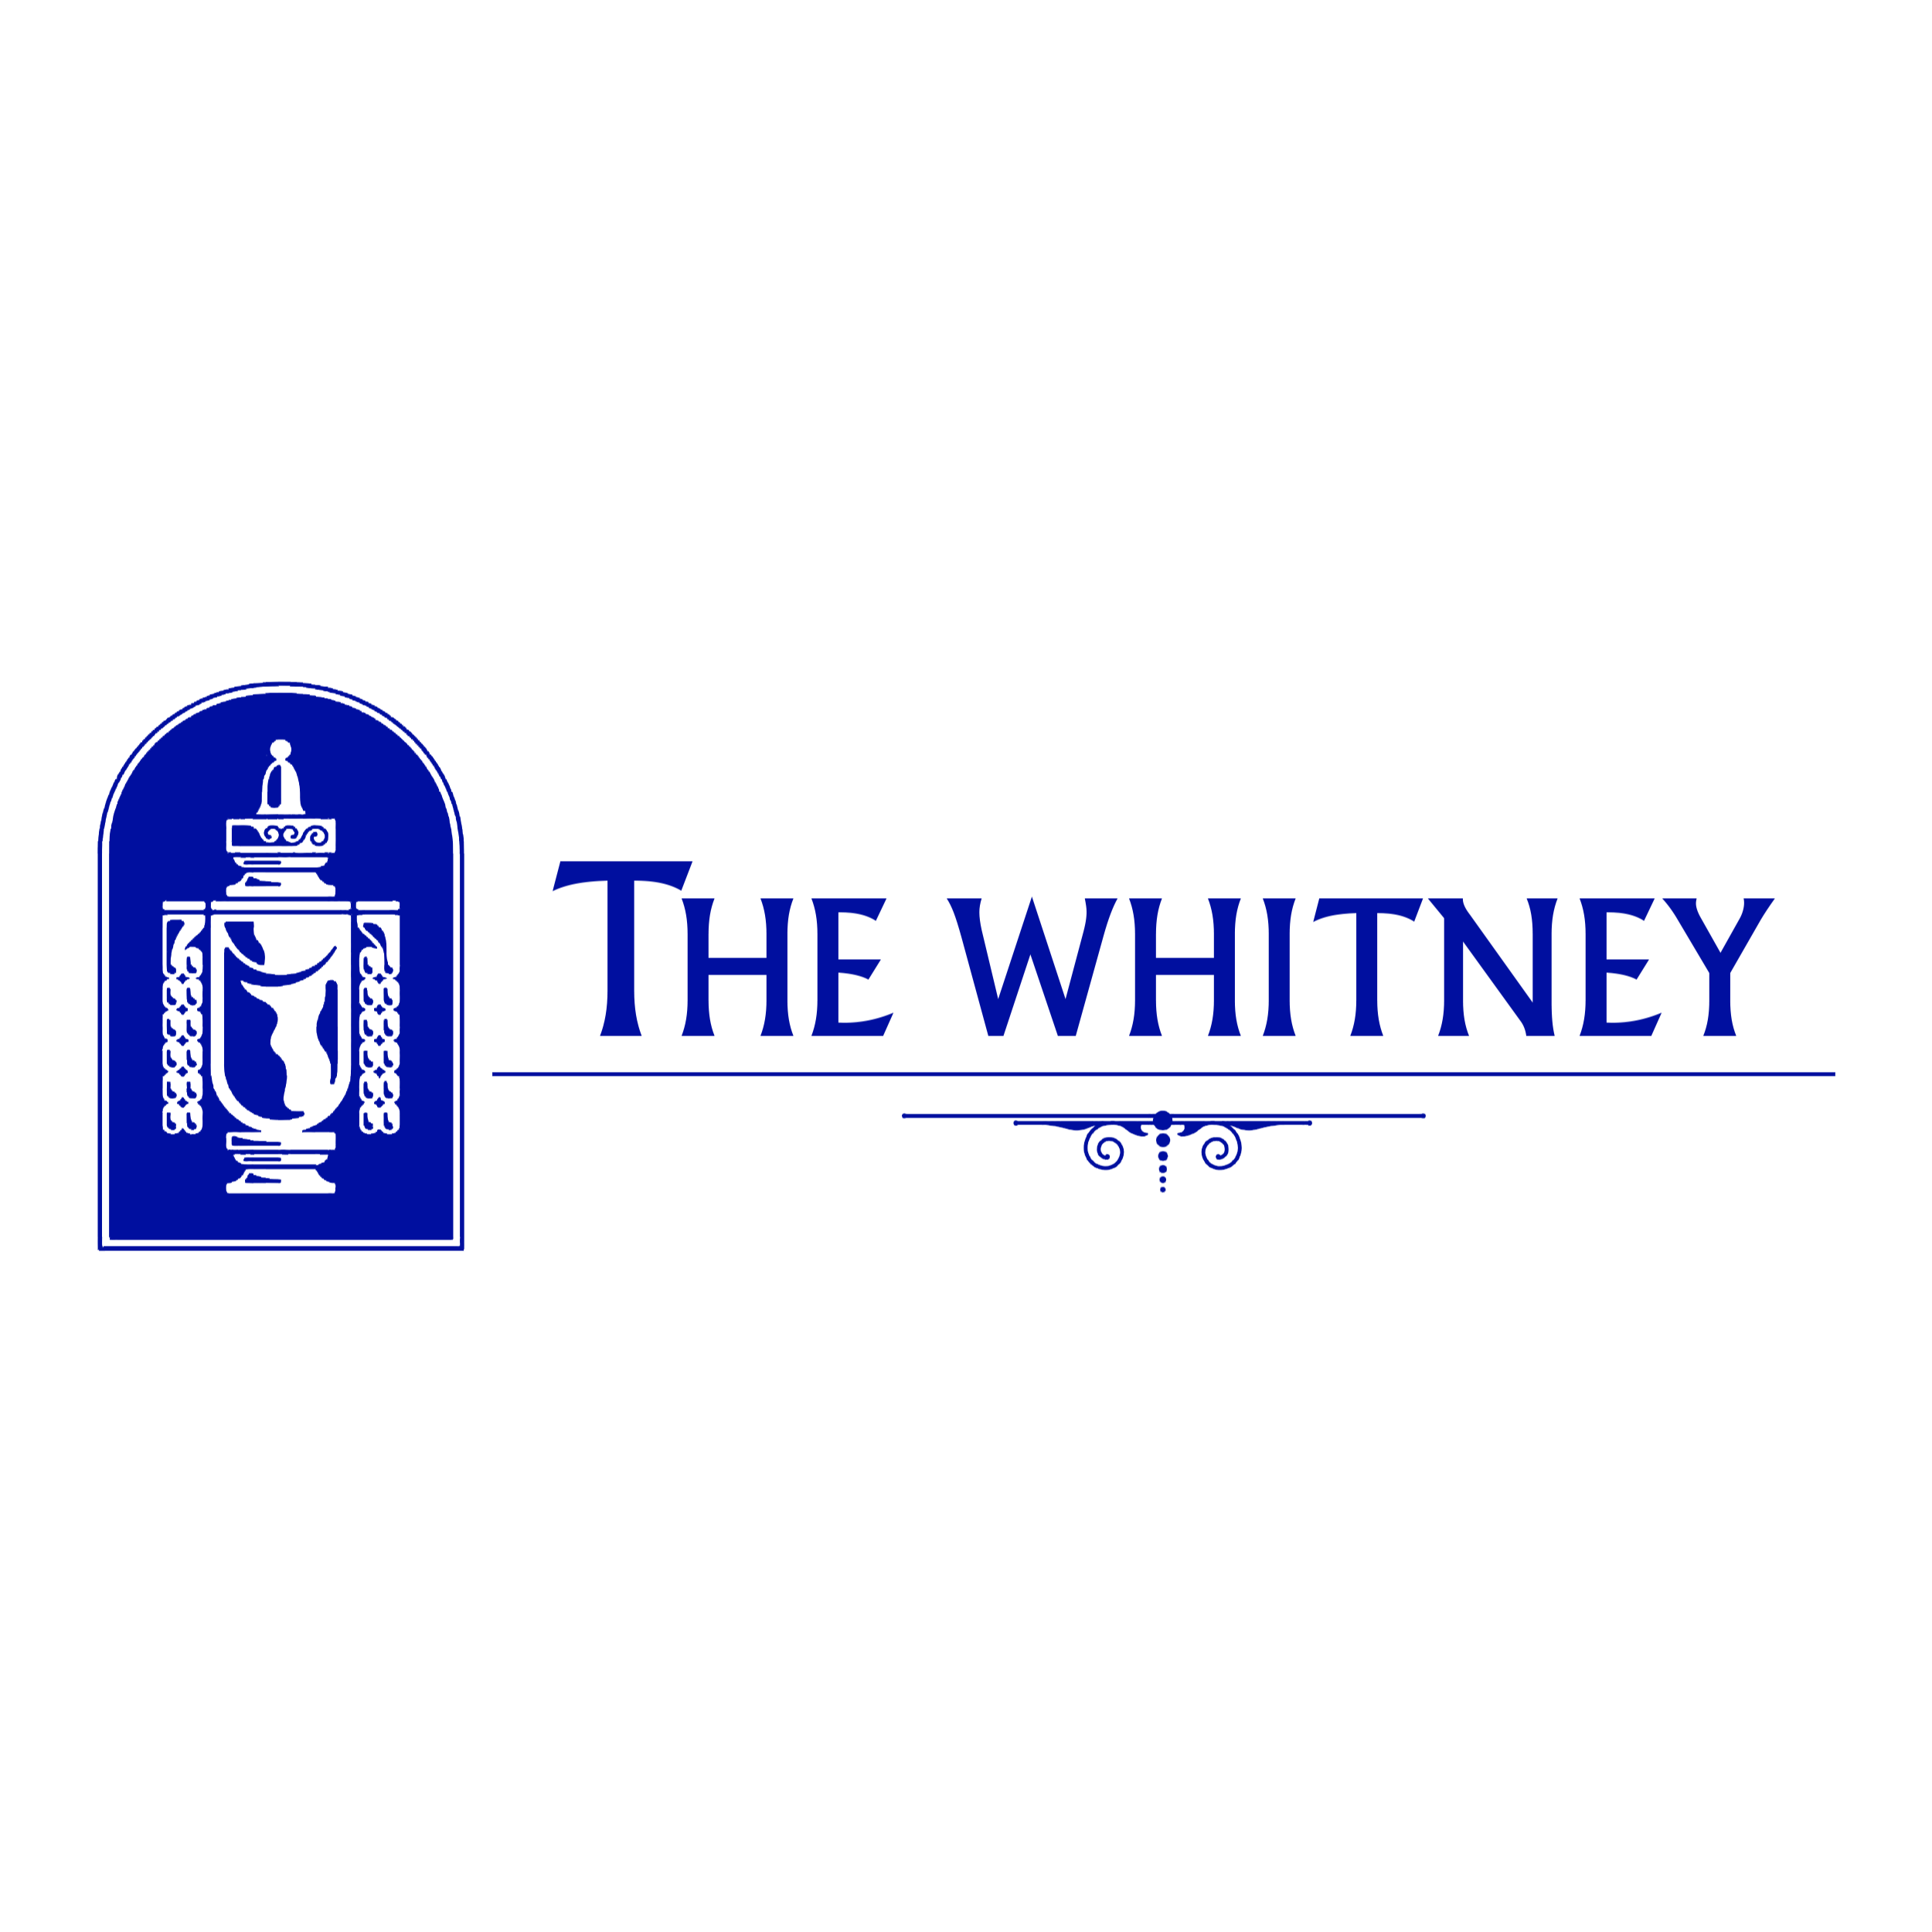 The Whitney Hotel New Orleans (504)581-4222